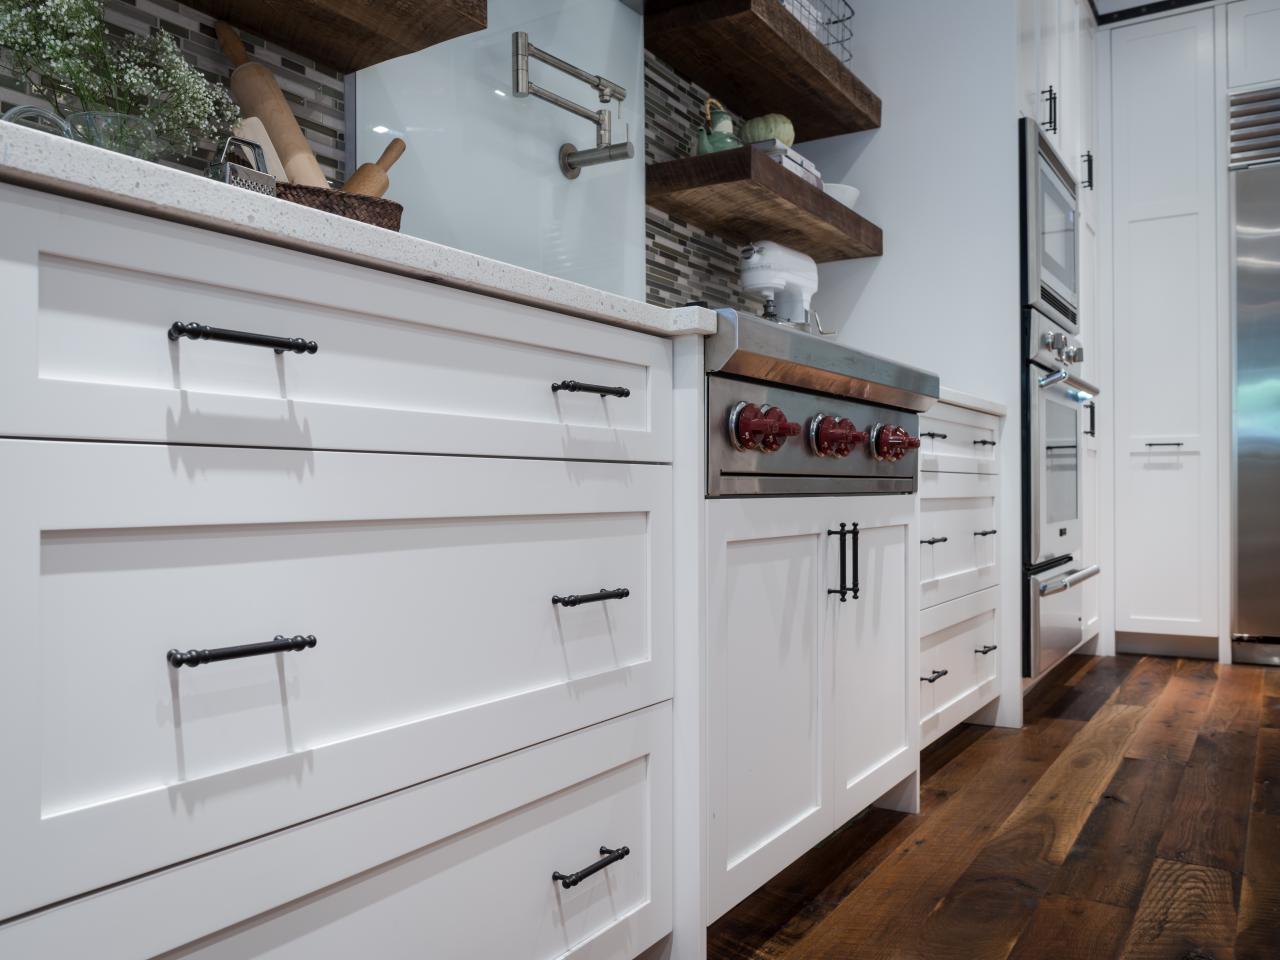 Rustic Trim Meets Modern Cabinetry And